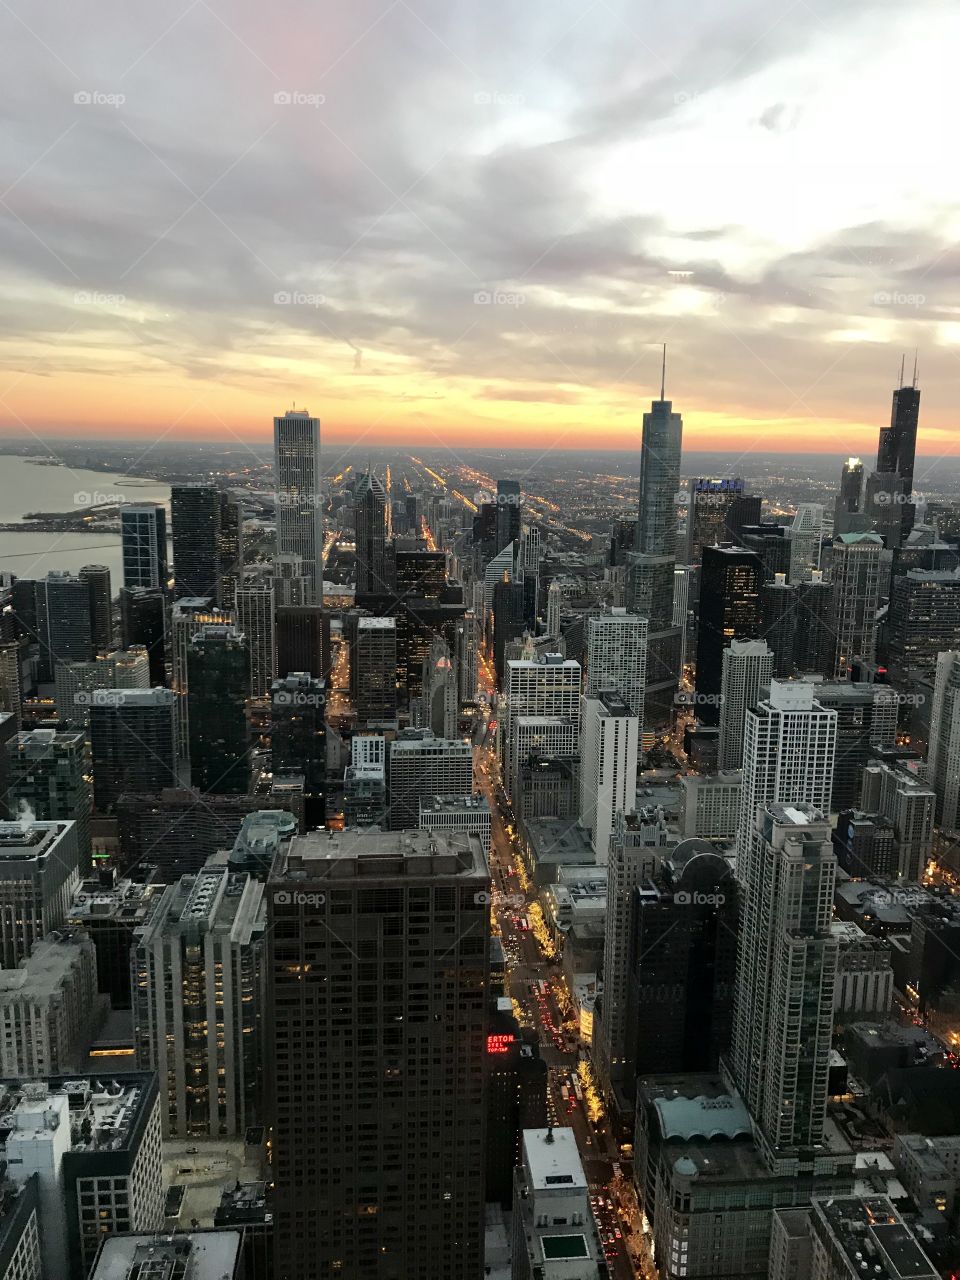 Colorful sunset behind a beautiful section of the Chicago skyline taken from the aerial advantage of the Signature Lounge